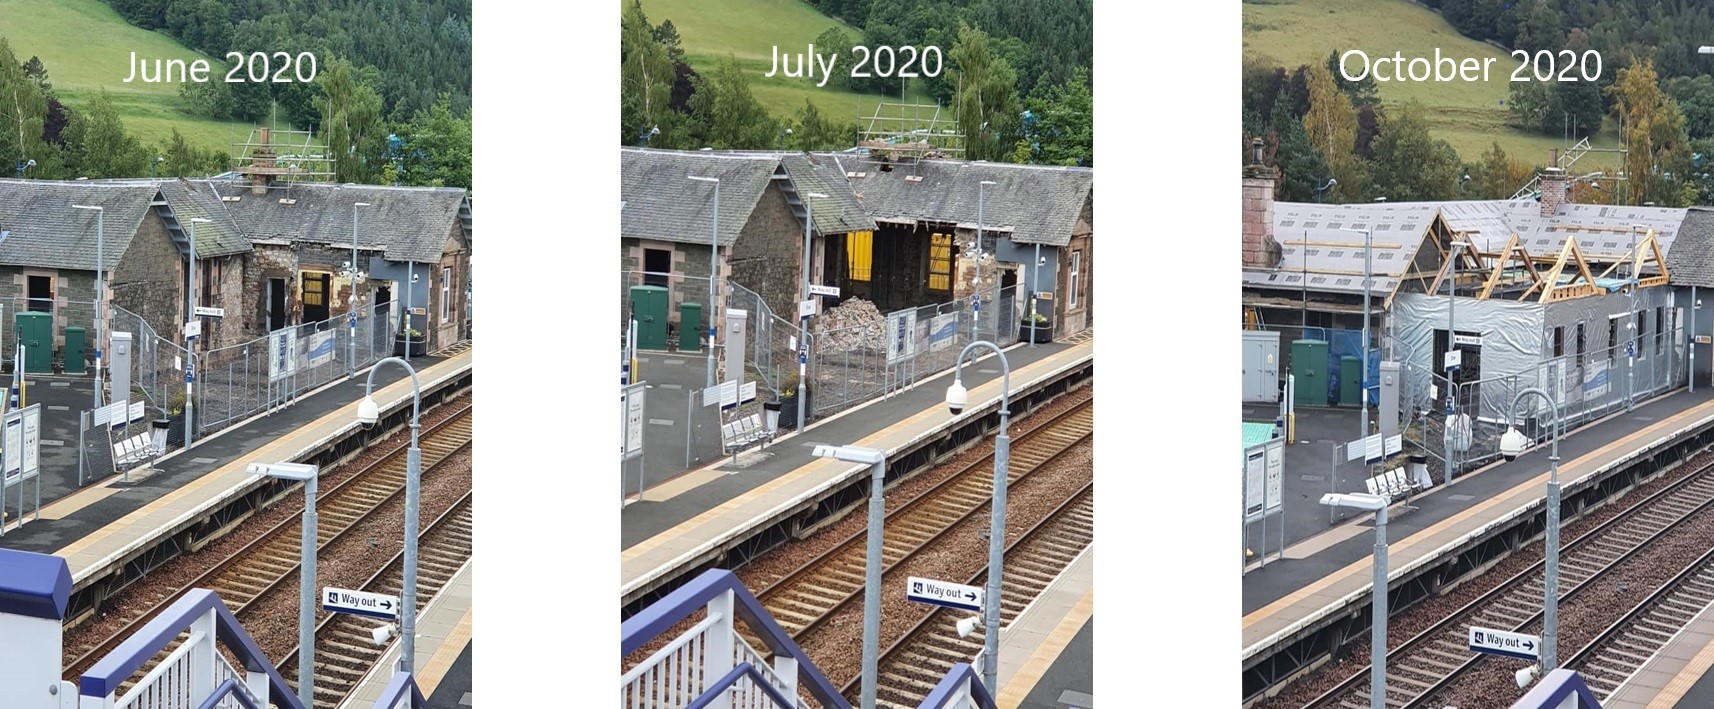 Stow Station progress pictures - three images, side by side, from June 2020 to October 2020